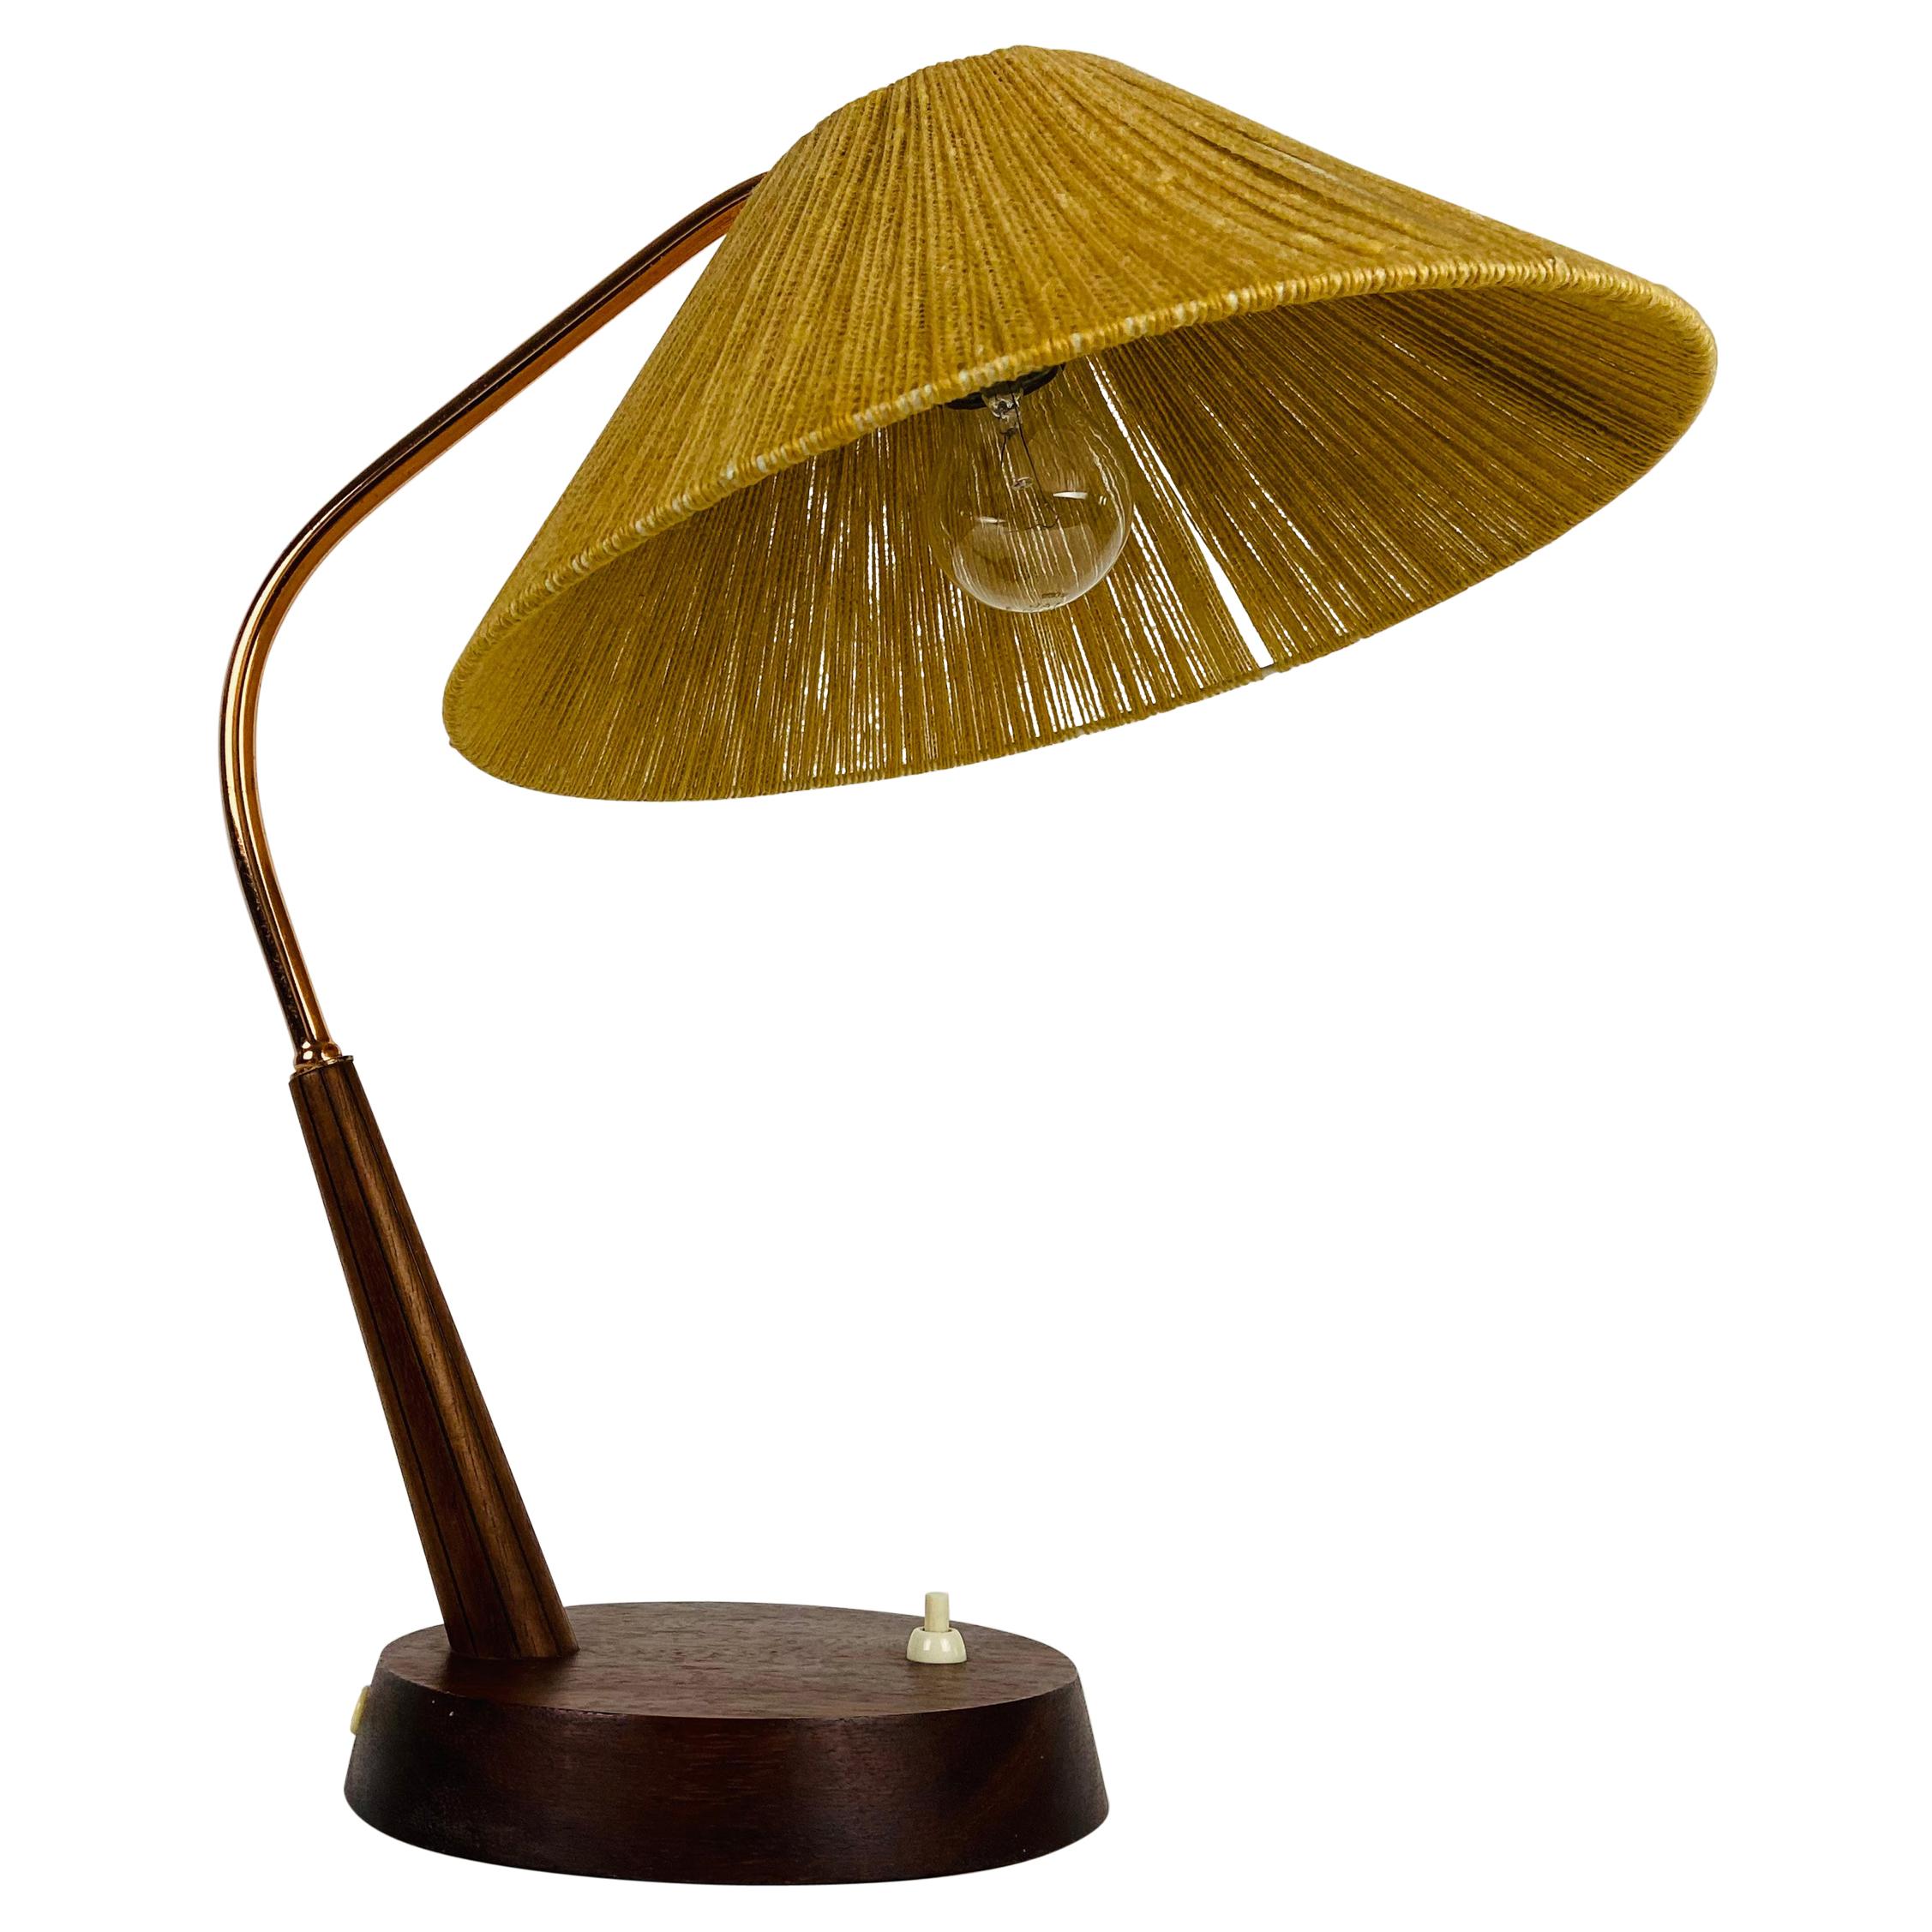 Midcentury Teak and Rattan Table Lamp by Temde, circa 1970 For Sale